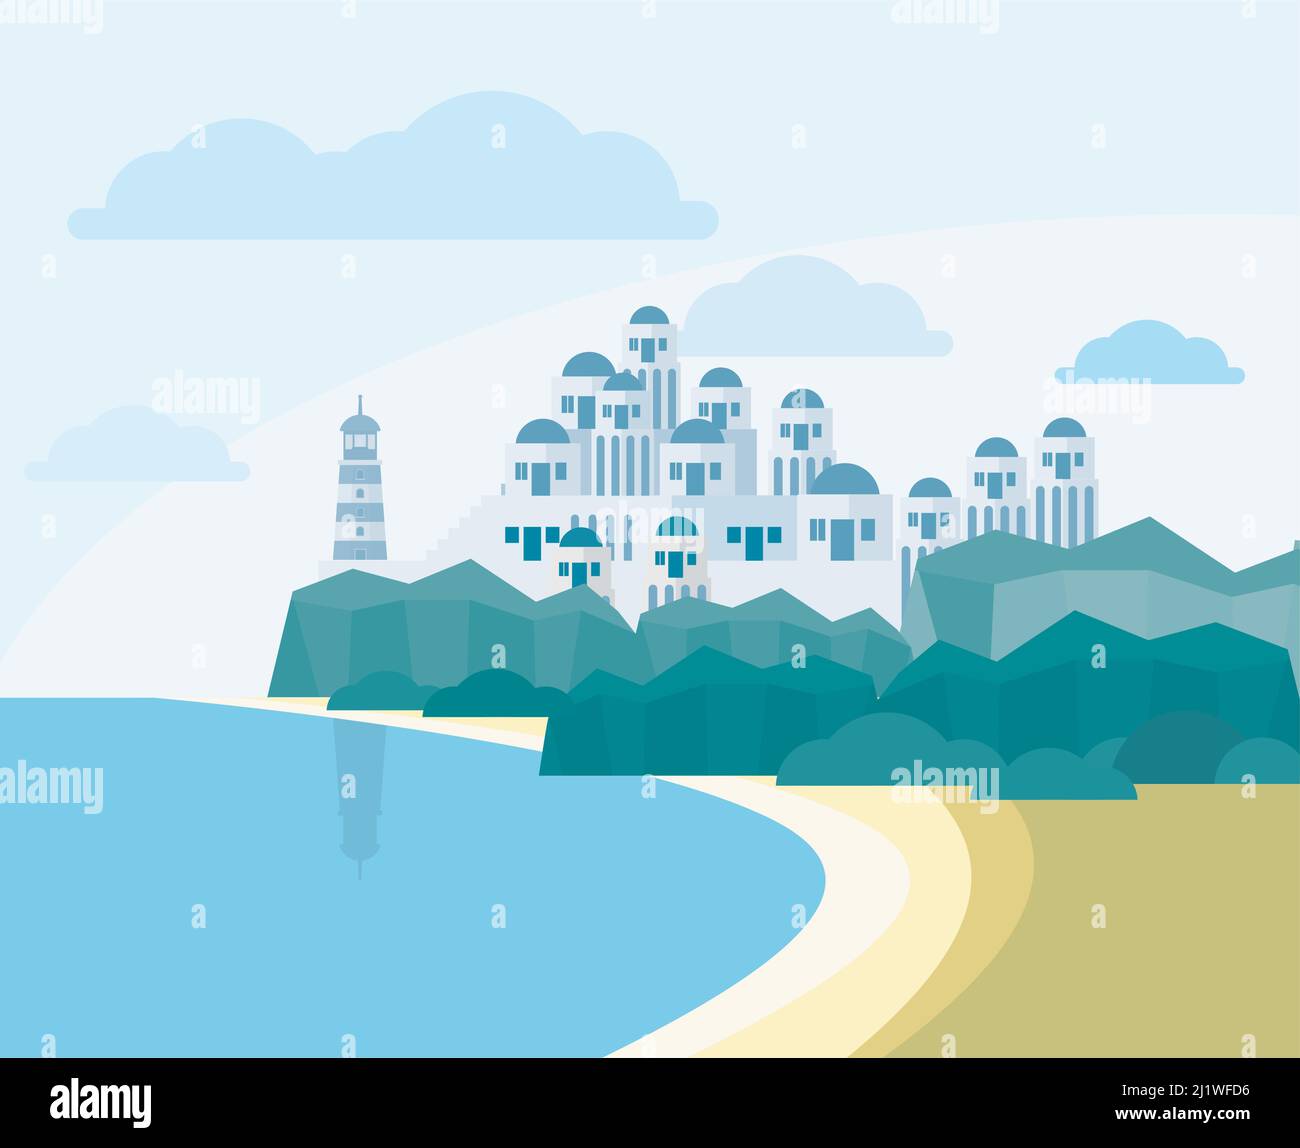 Cartoon Background with typical greece island Architecture - vector illustration Stock Vector